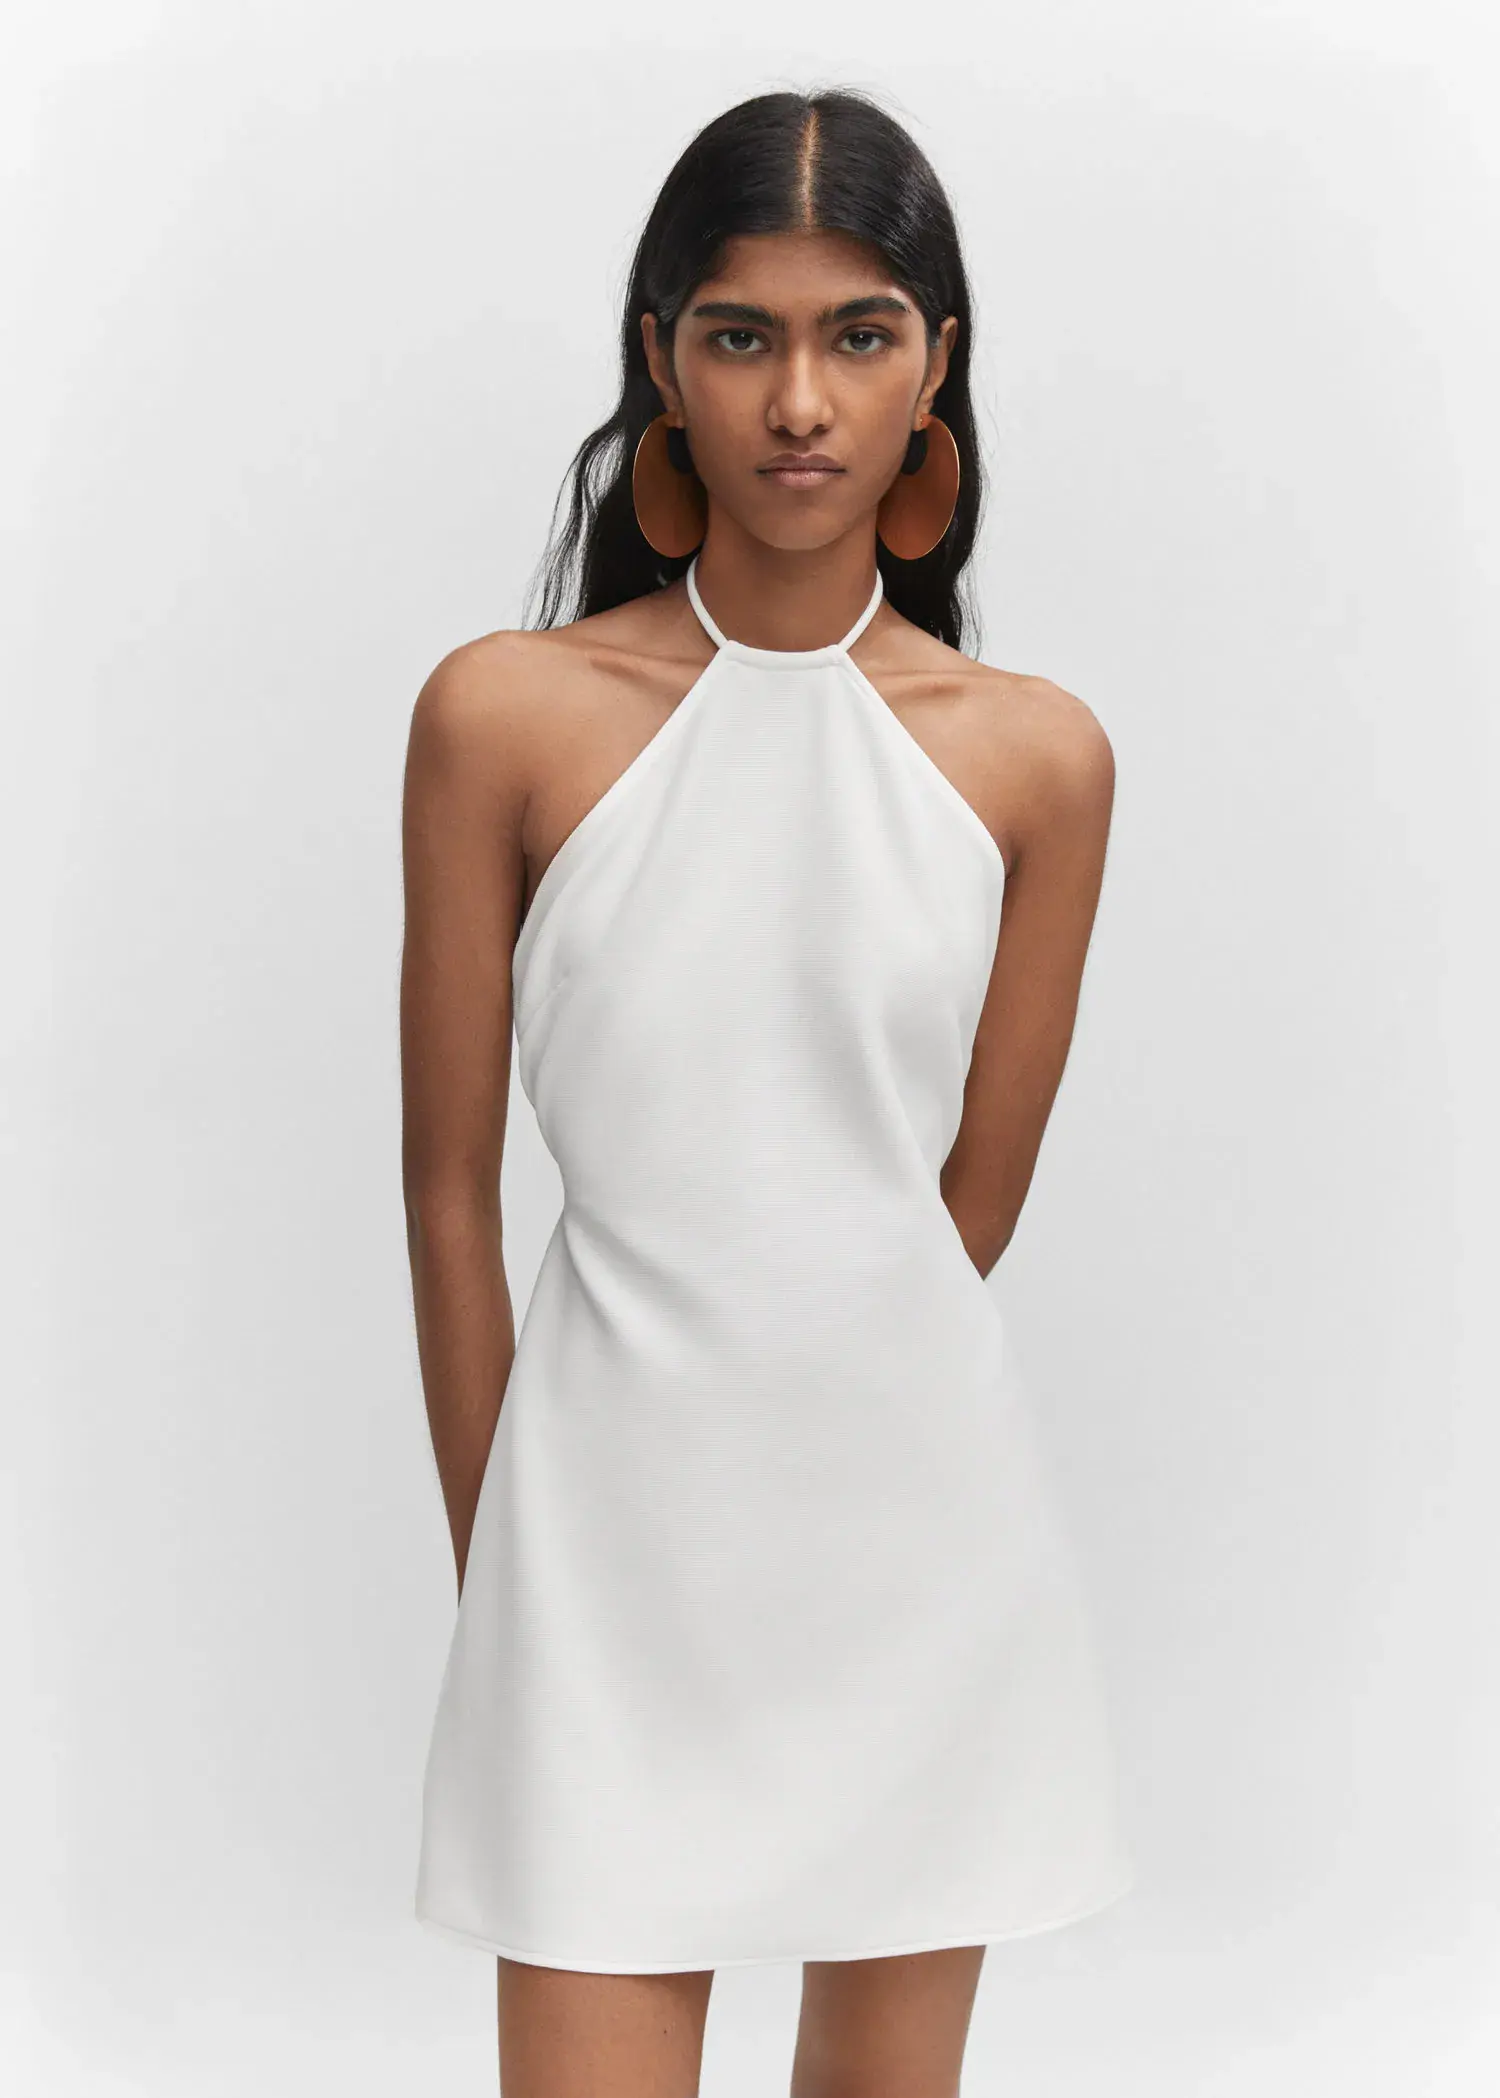 Mango Halter-neck dress with metal detail. a woman wearing a white dress and earrings. 